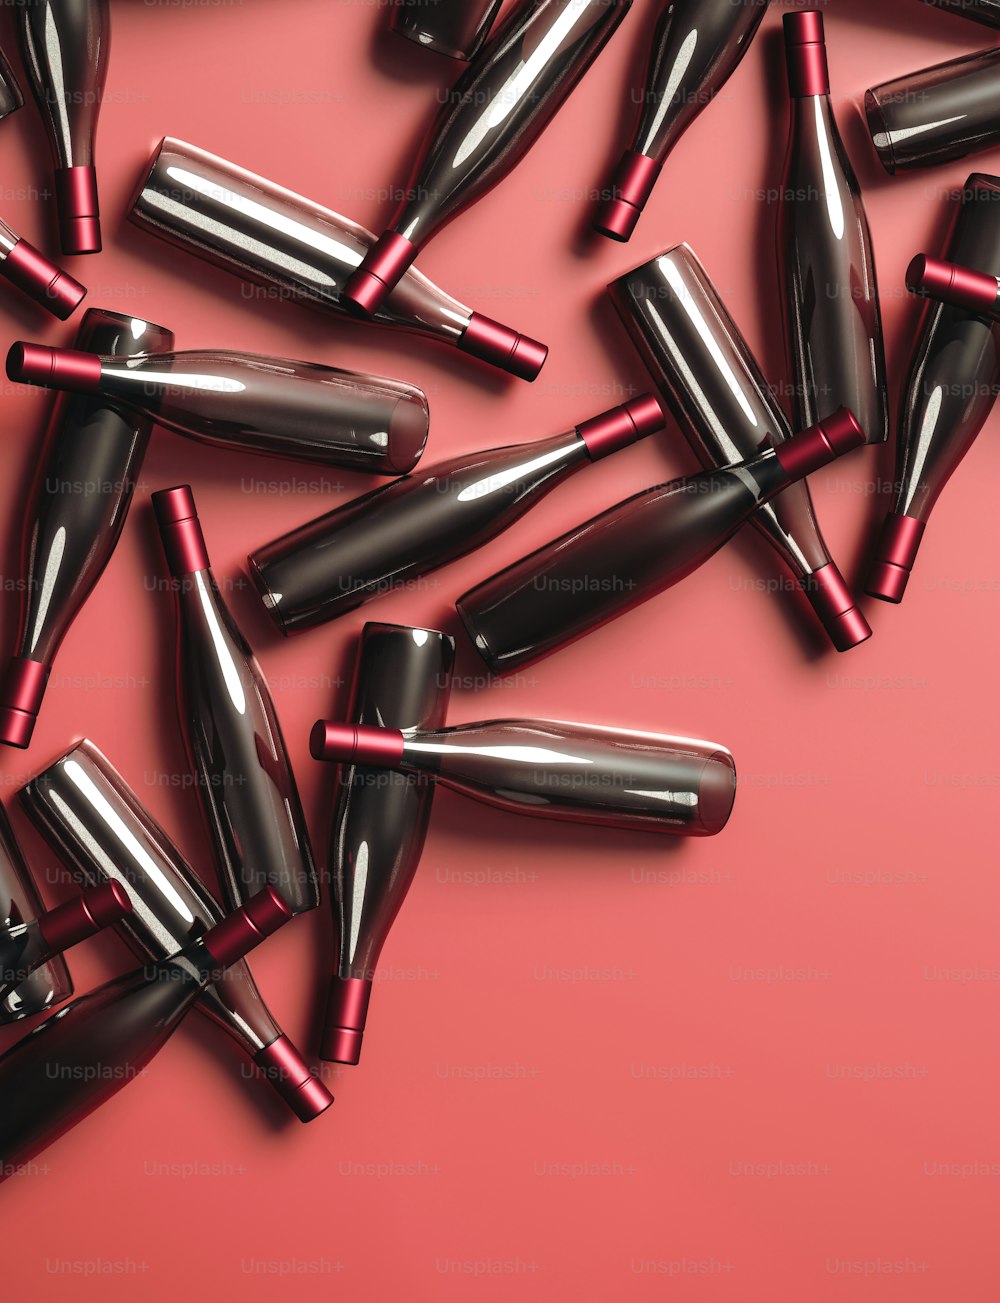 a group of black and red lipsticks on a pink background